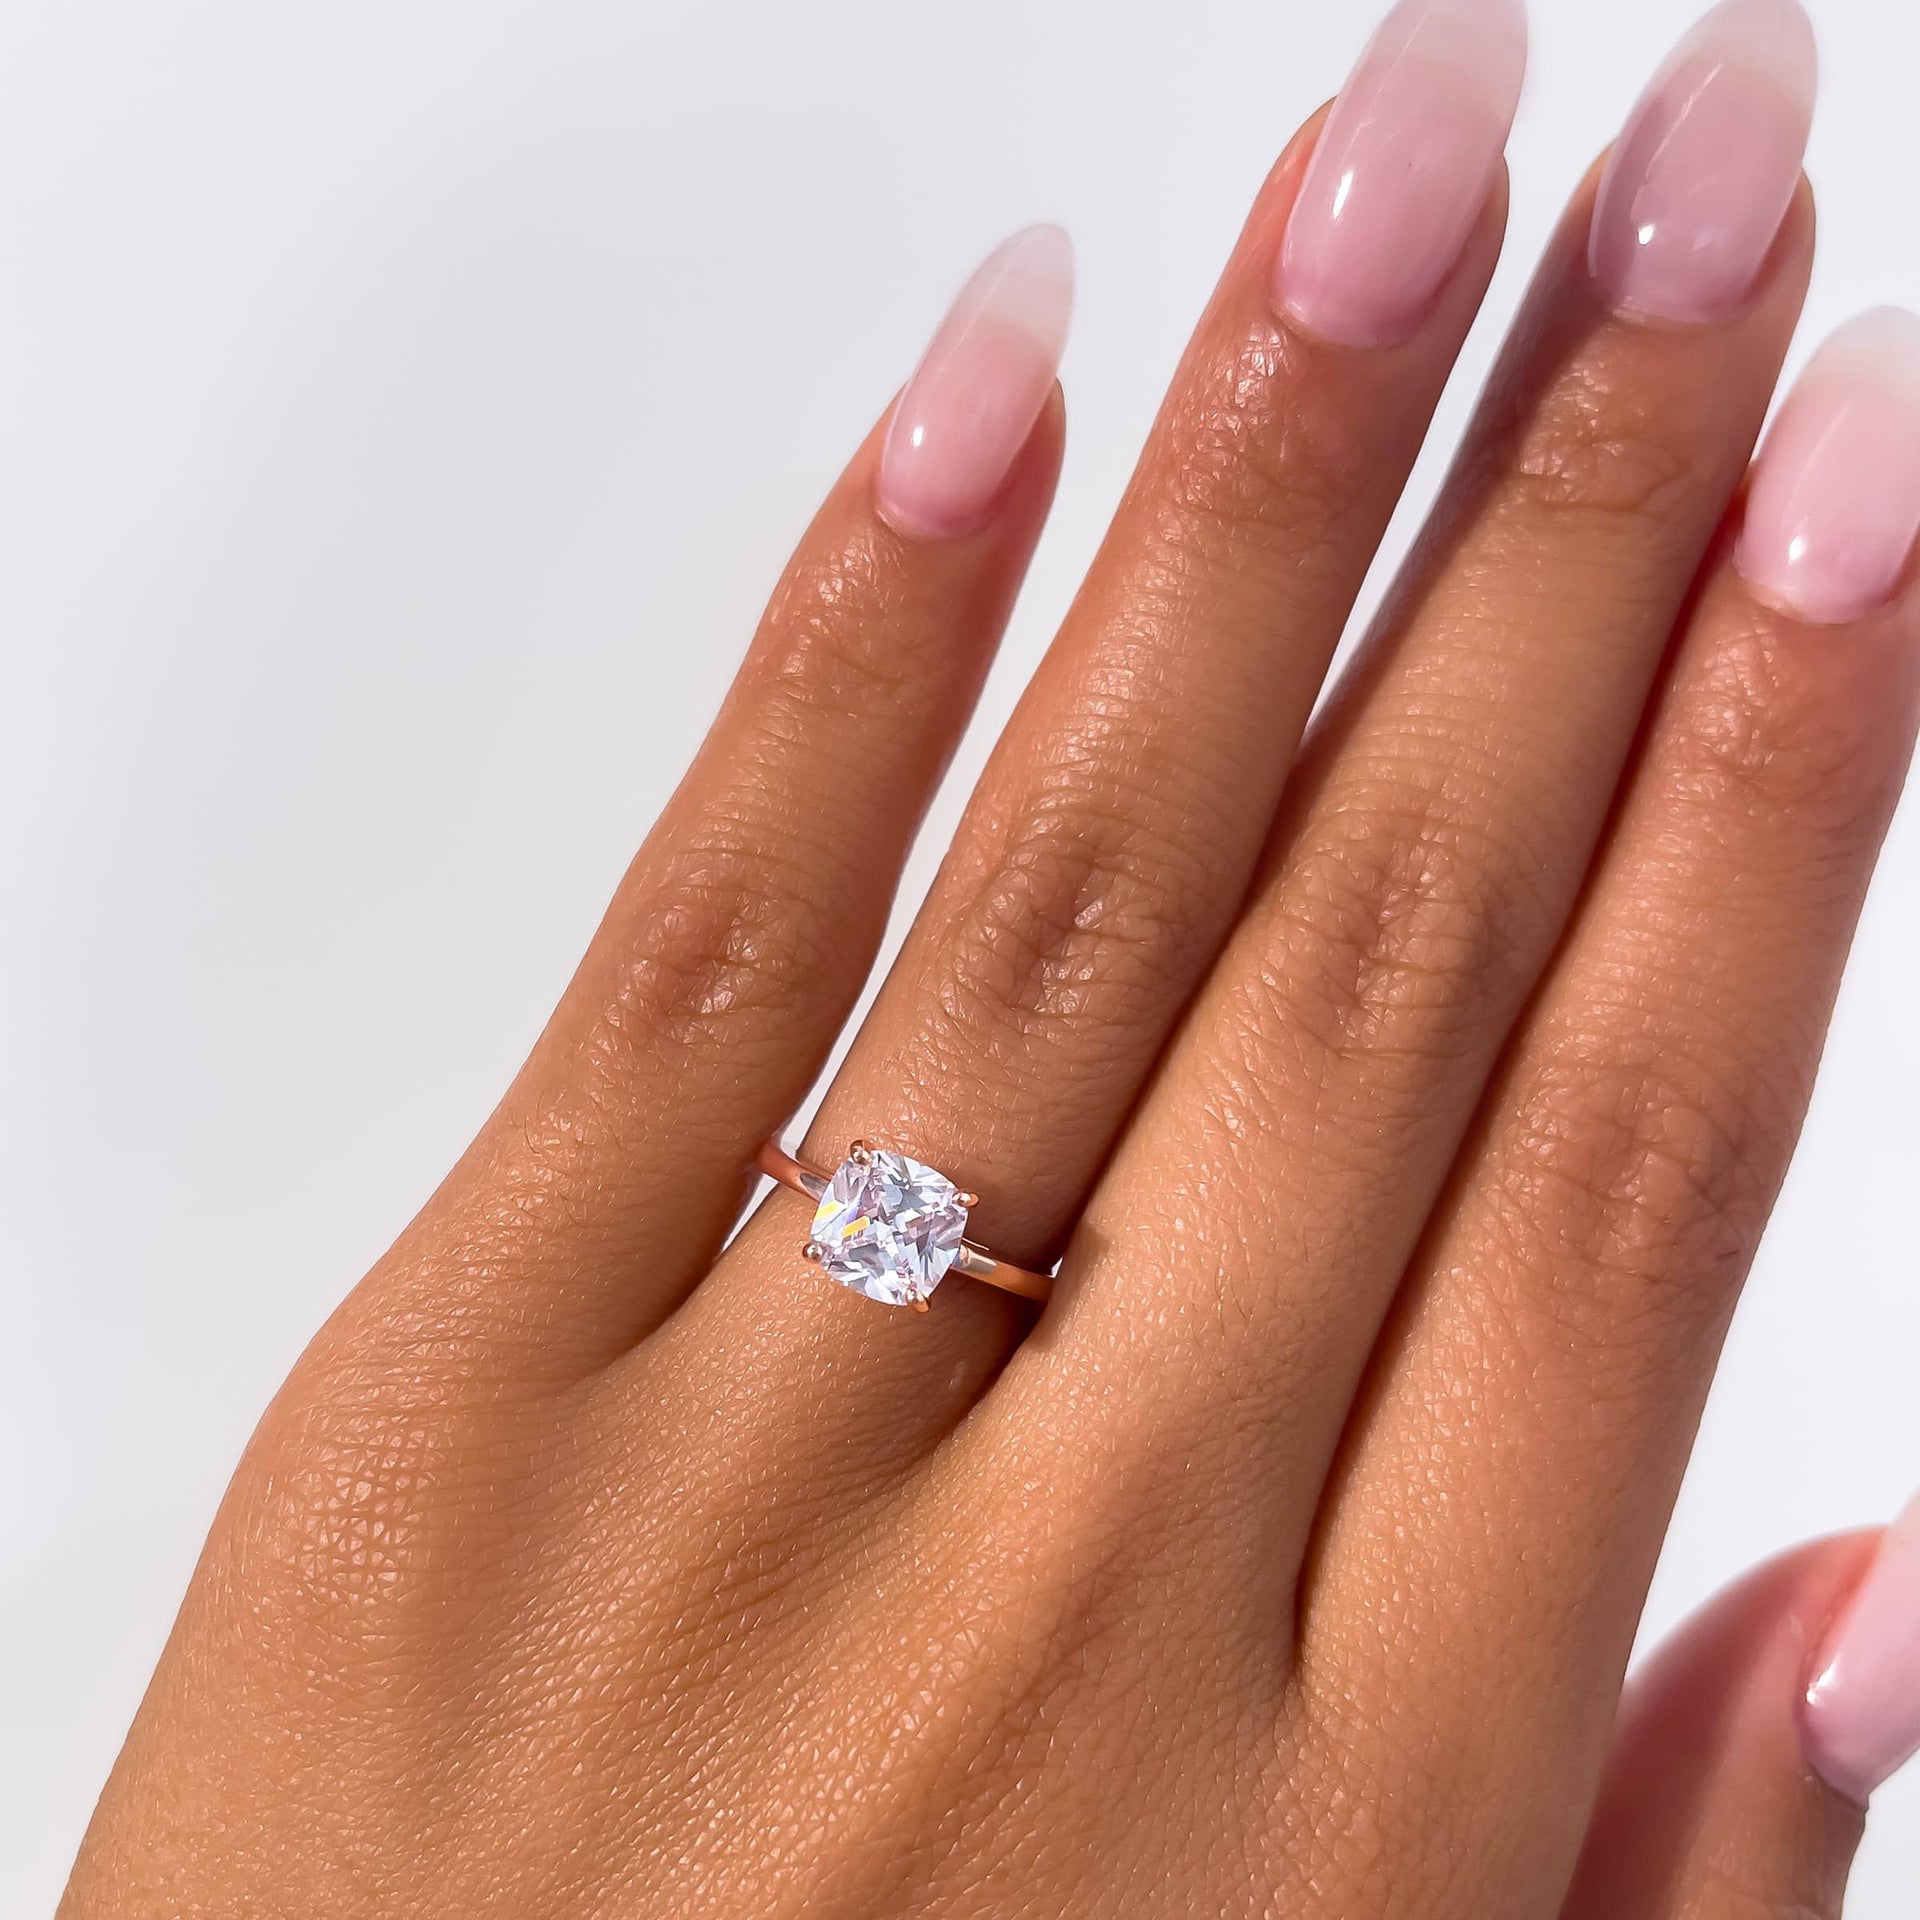 1 carat cushion cut solitaire engagement ring on model with neutral nails